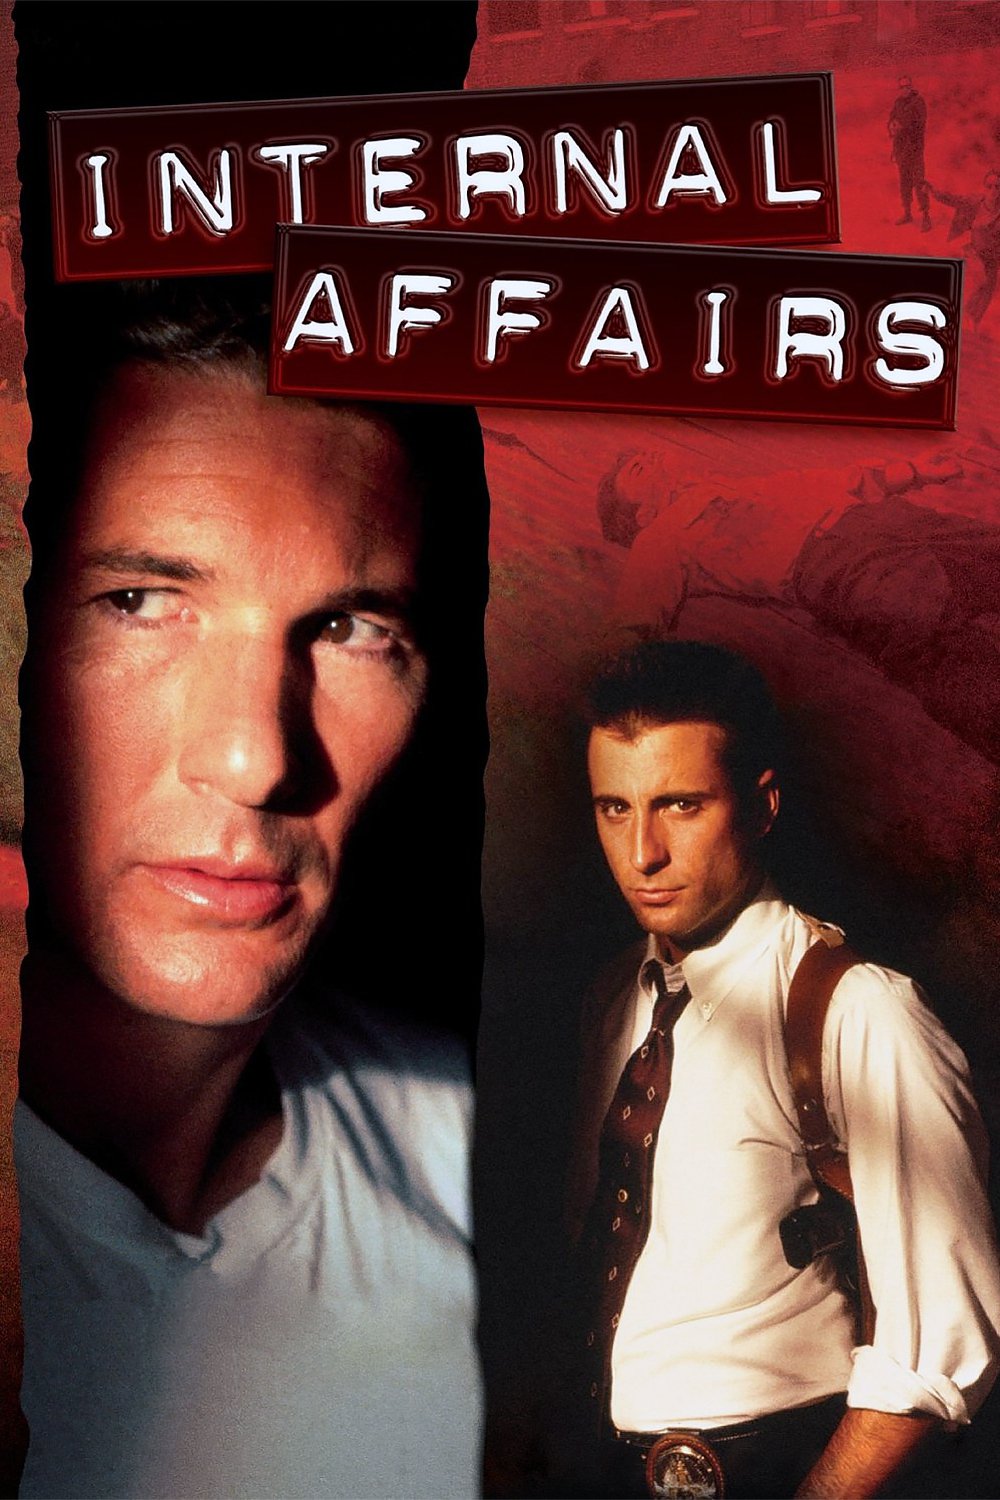 Poster for the movie "Internal Affairs"